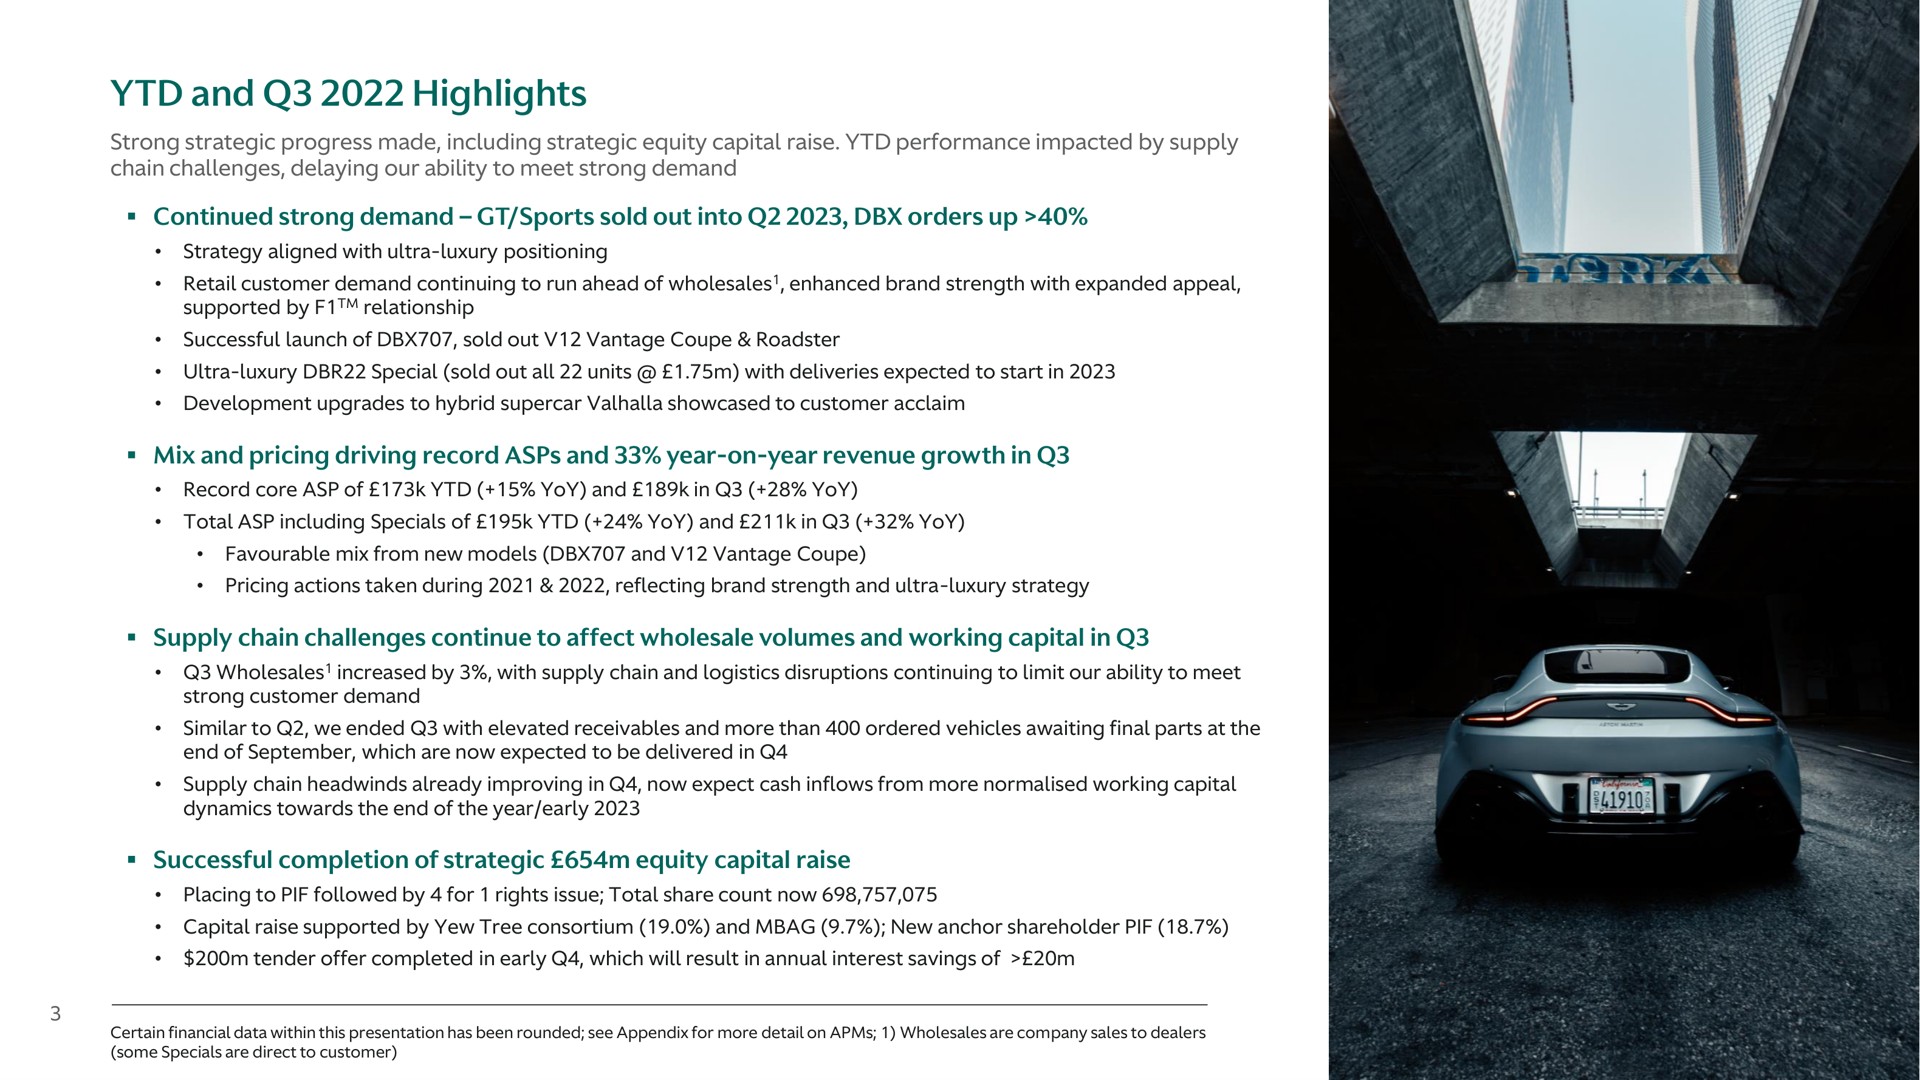 and highlights continued strong demand sports sold out into orders up mix and pricing driving record asps and year on year revenue growth in supply chain challenges continue to affect wholesale volumes and working capital in successful completion of strategic equity capital raise | Aston Martin Lagonda